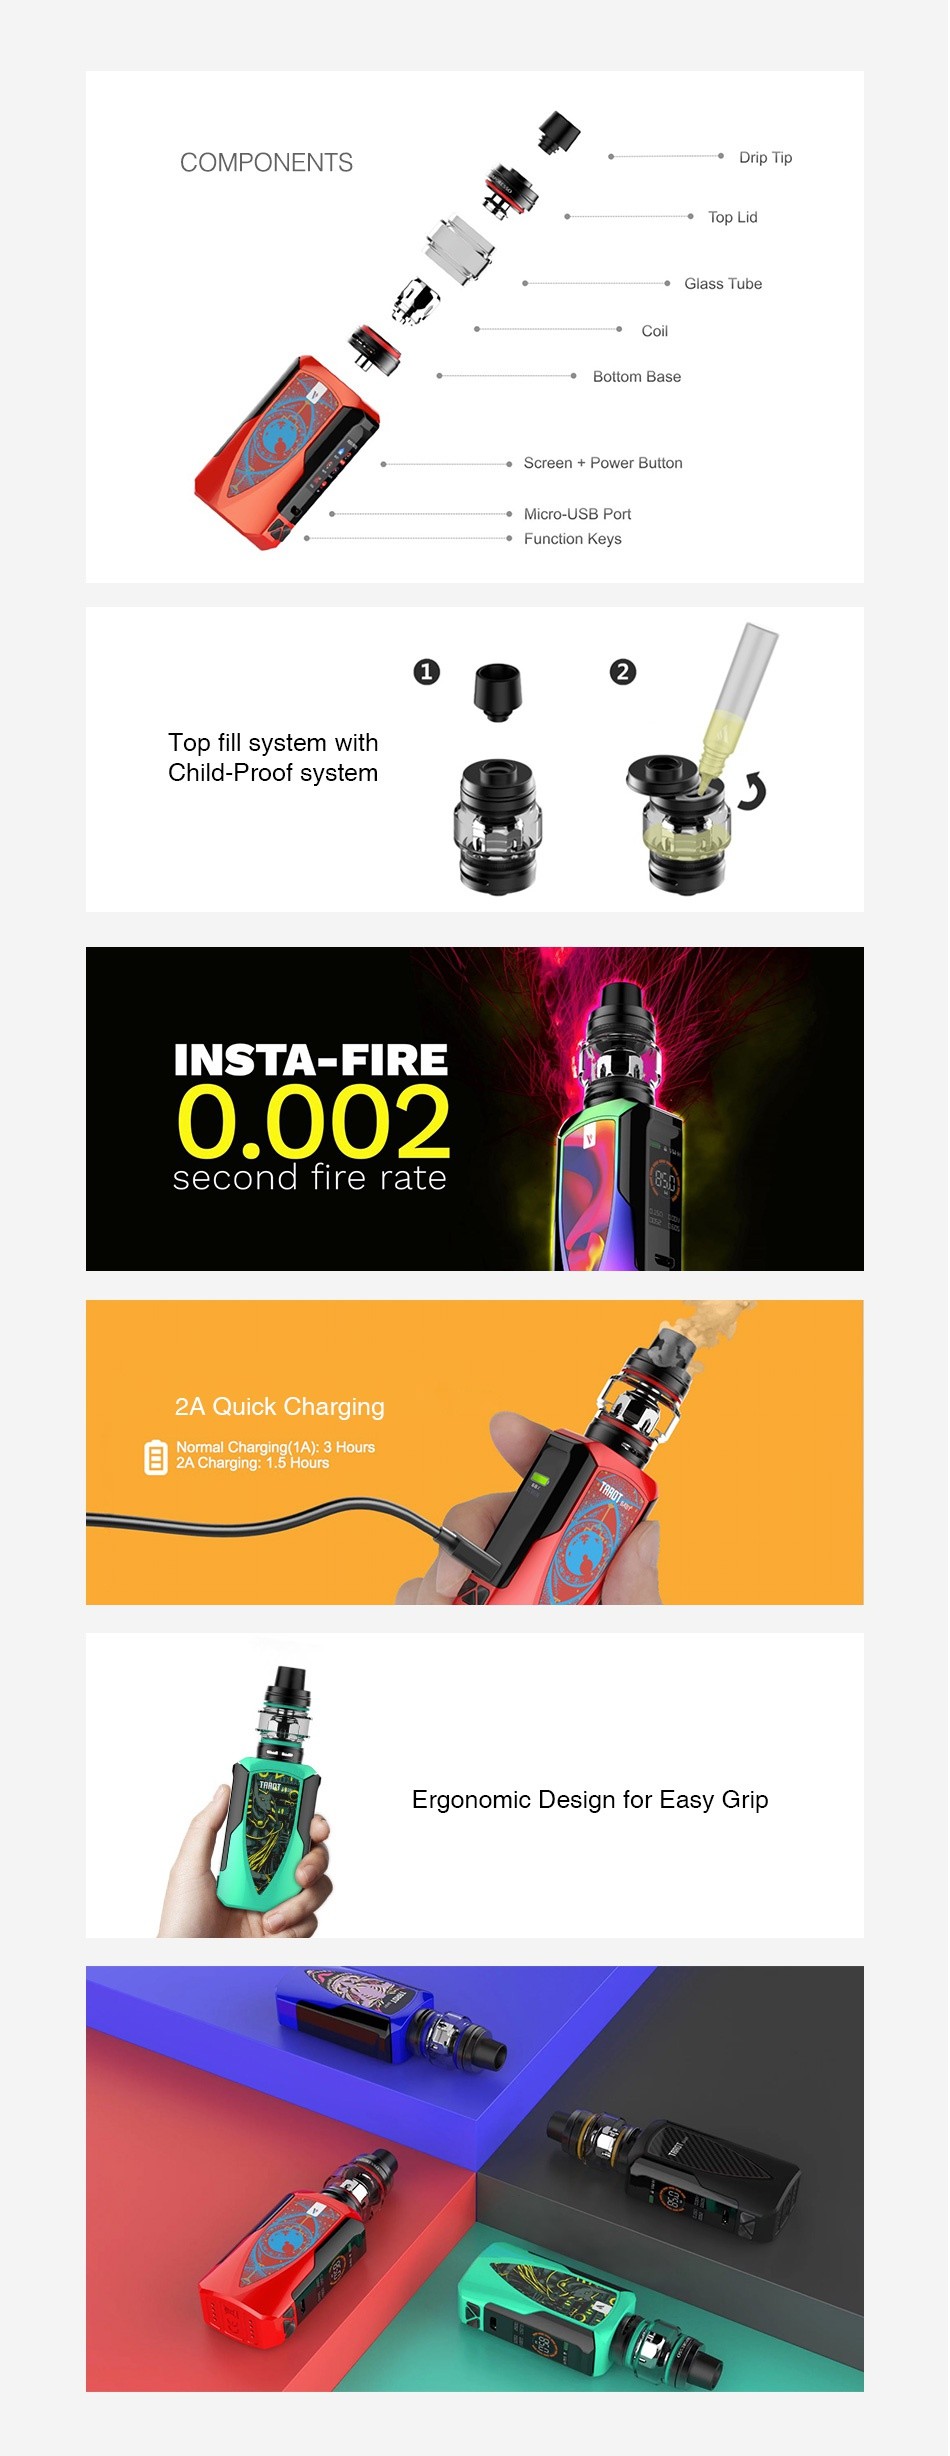 Vaporesso Tarot Baby 85W TC Kit with NRG SE 2500mAh COMPONENTS Glass Tube Bottom Base e Screen Pcwer Button Micro USB Port Function Keys Top till system with Child Proof system NSTA FR  0002 second fire rate 2A Quick Charging   ormal Charging 1A   3 Hours Ergonomic Design for Easy Grip